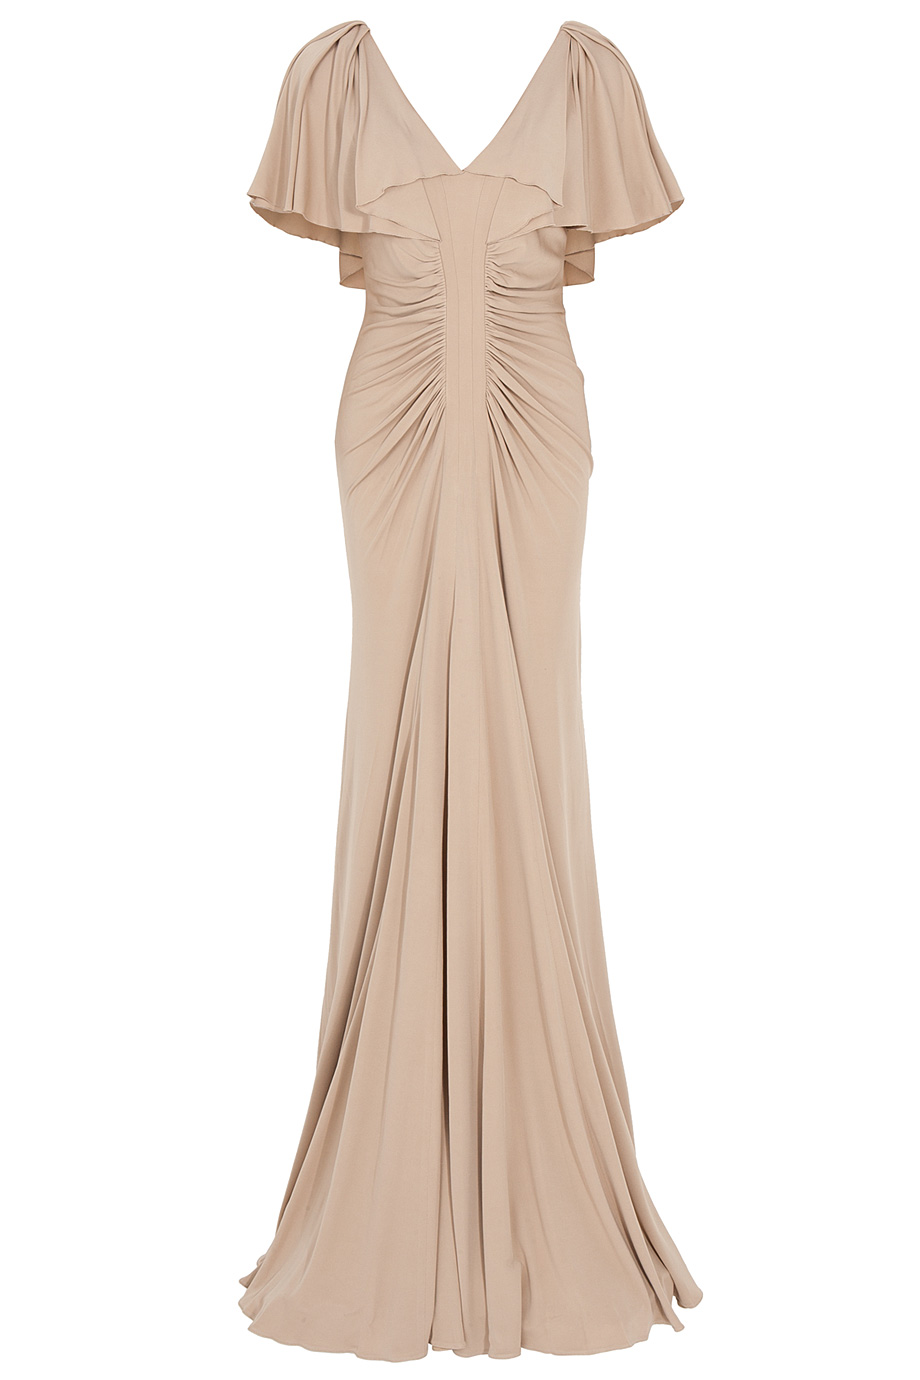 Lyst - Elie Saab Jersey Cap Sleeve Gown in Natural